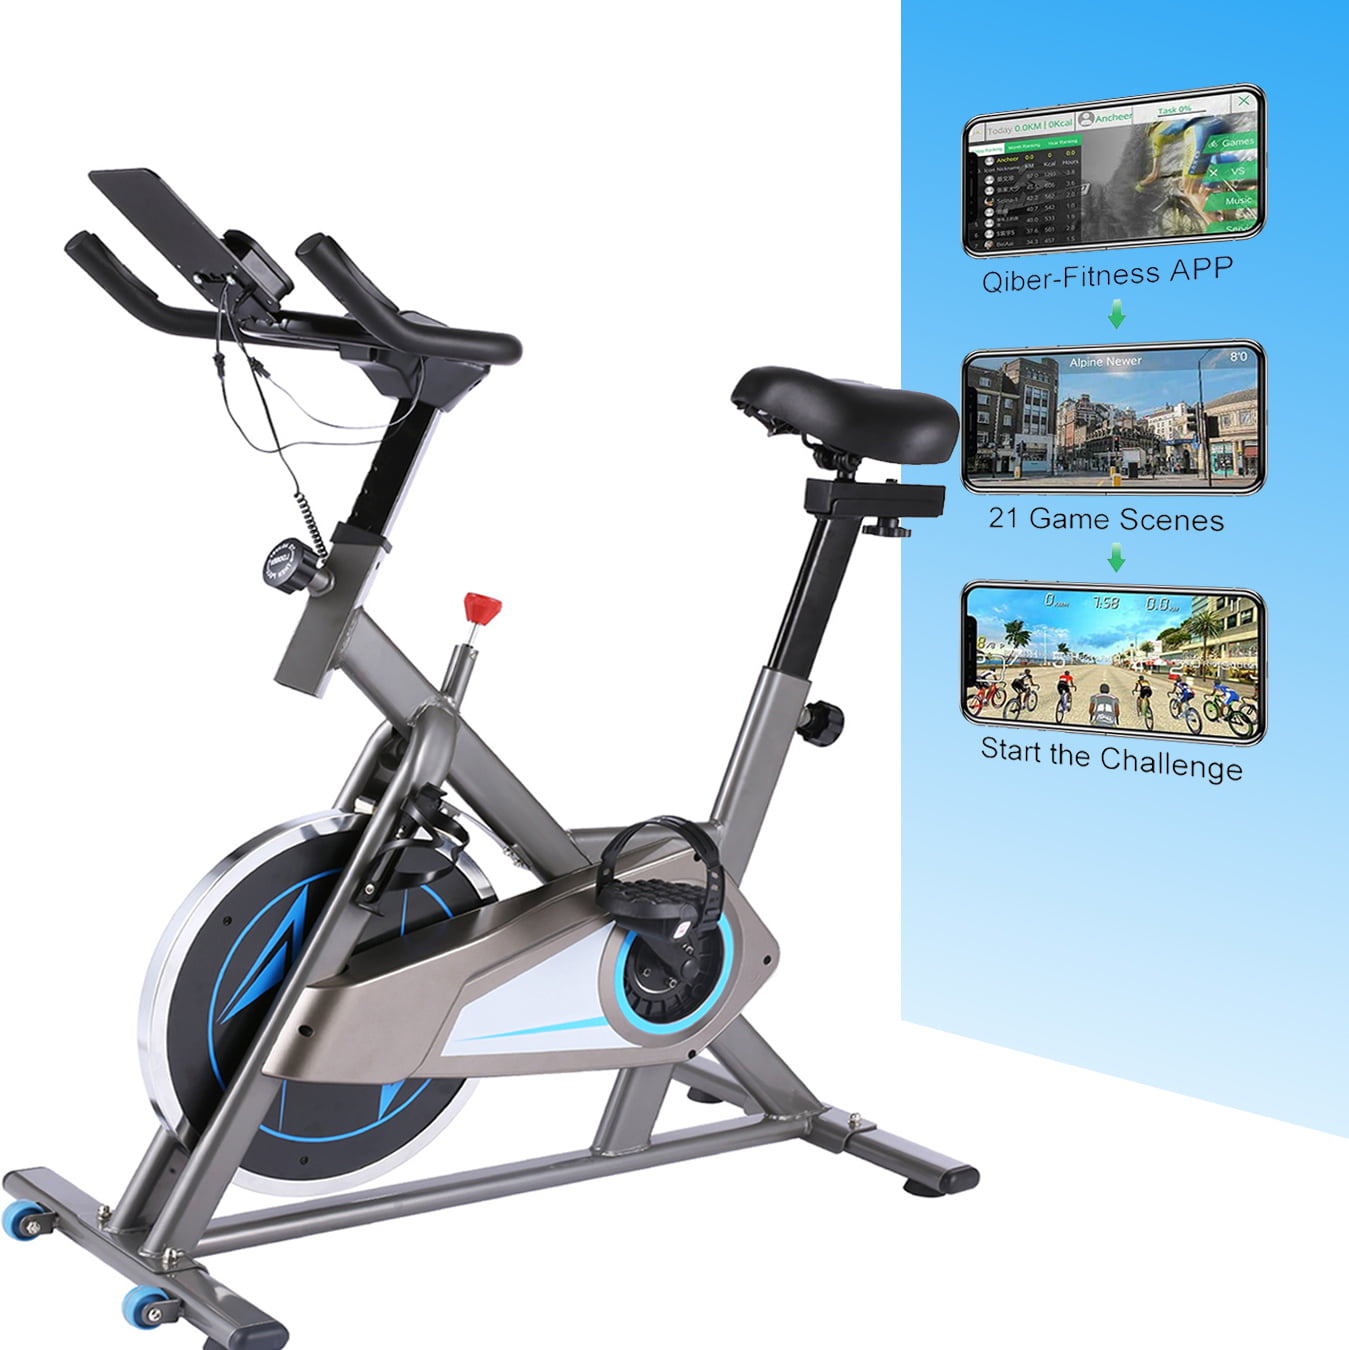 ANCHEER Folding Exercise Bike with APP Simulation Game Indoor Stationary Bike 